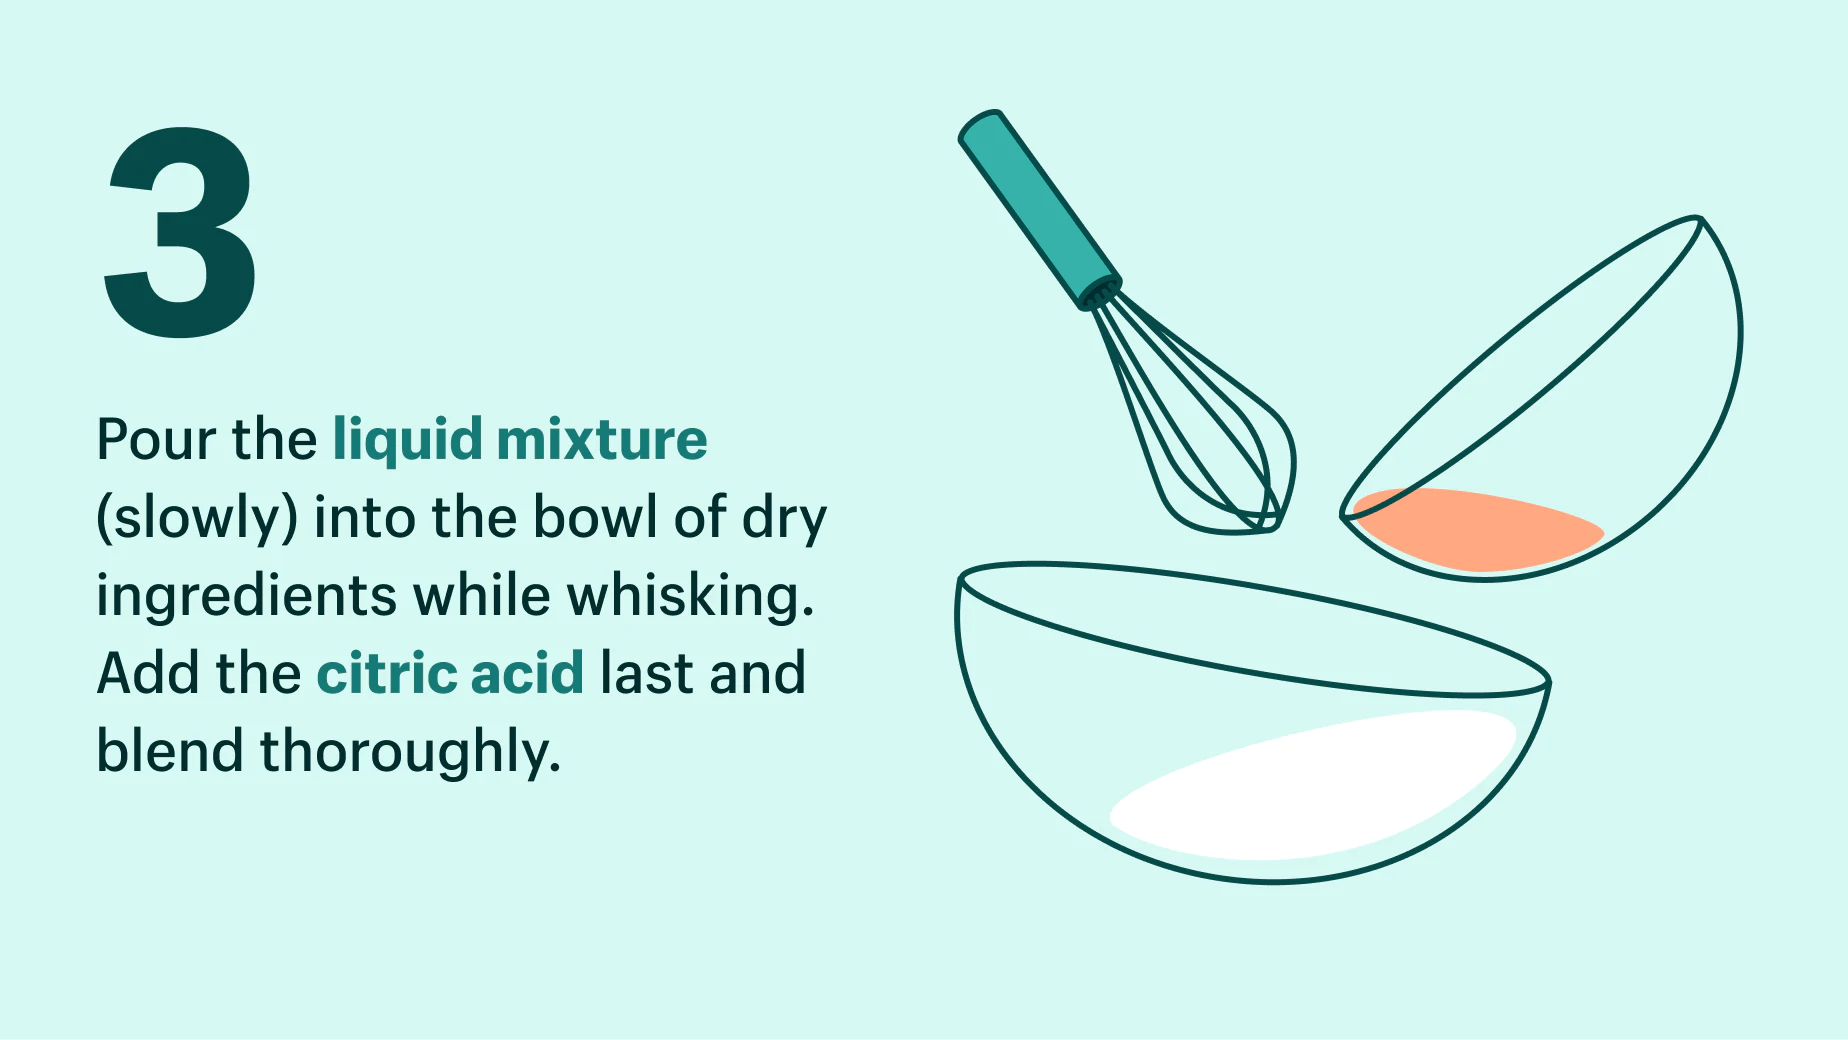 Step 3 to making bath bombs at home: whisk together all ingredients